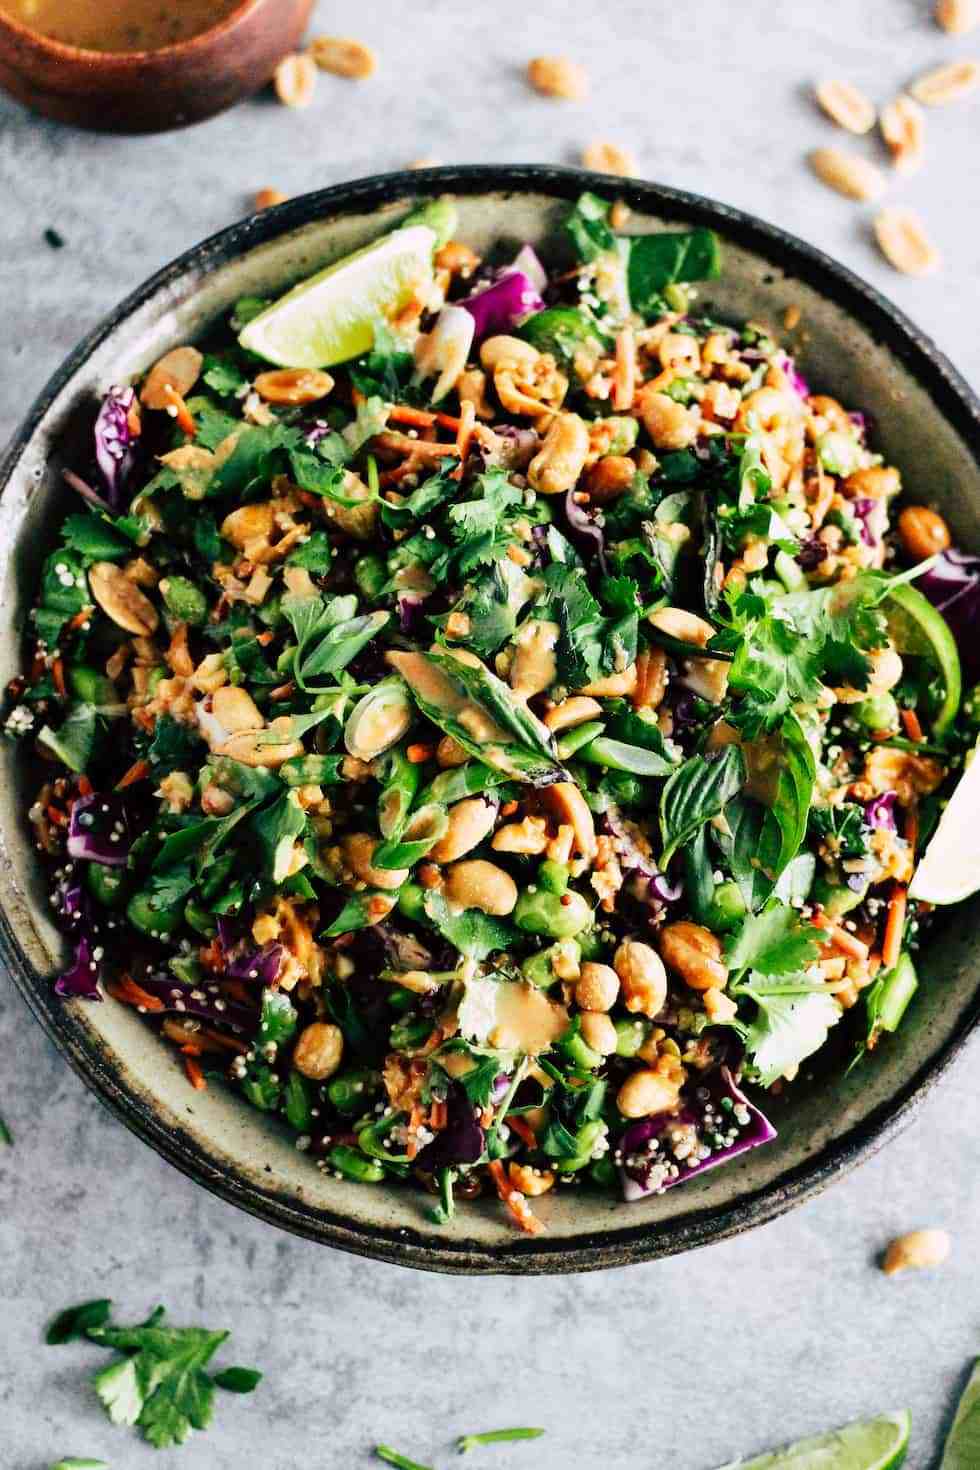 Edamame salad with peanuts is an easy college meal 